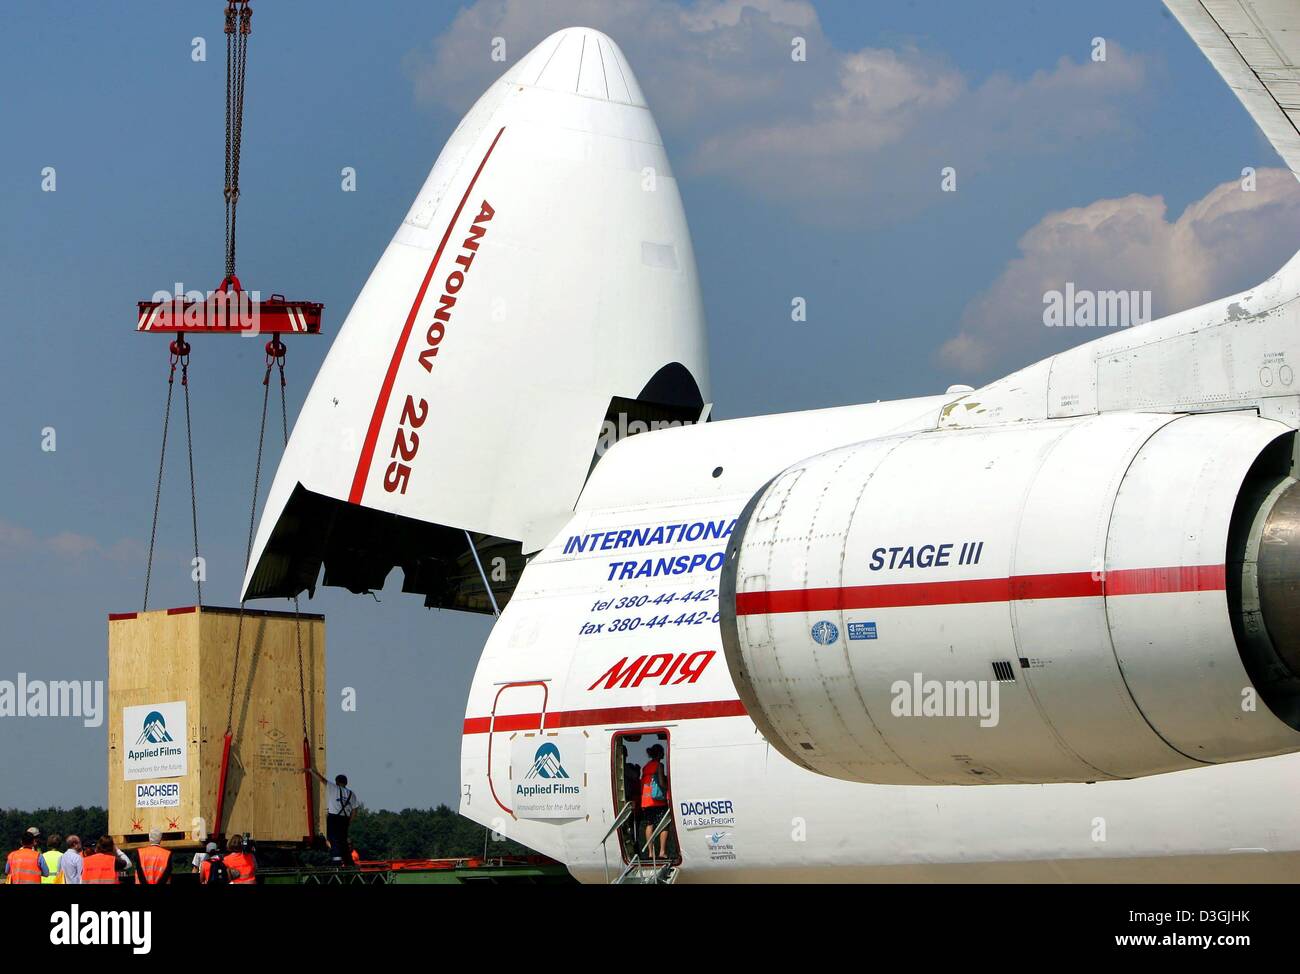 (dpa) - An Antonov AN 225 stands with an open hatch on the airfield while being loaded at the Cologne/Bonn airport in Cologne, Germany, 30 July 2004. With a wing span measuring 88 metres, a length of 84 metres and a maximum capacity of 600 tons, the Russian Antonov AN 225 is the largest transport and cargo airplane in the world. It is the only plane of this type currently in servic Stock Photo